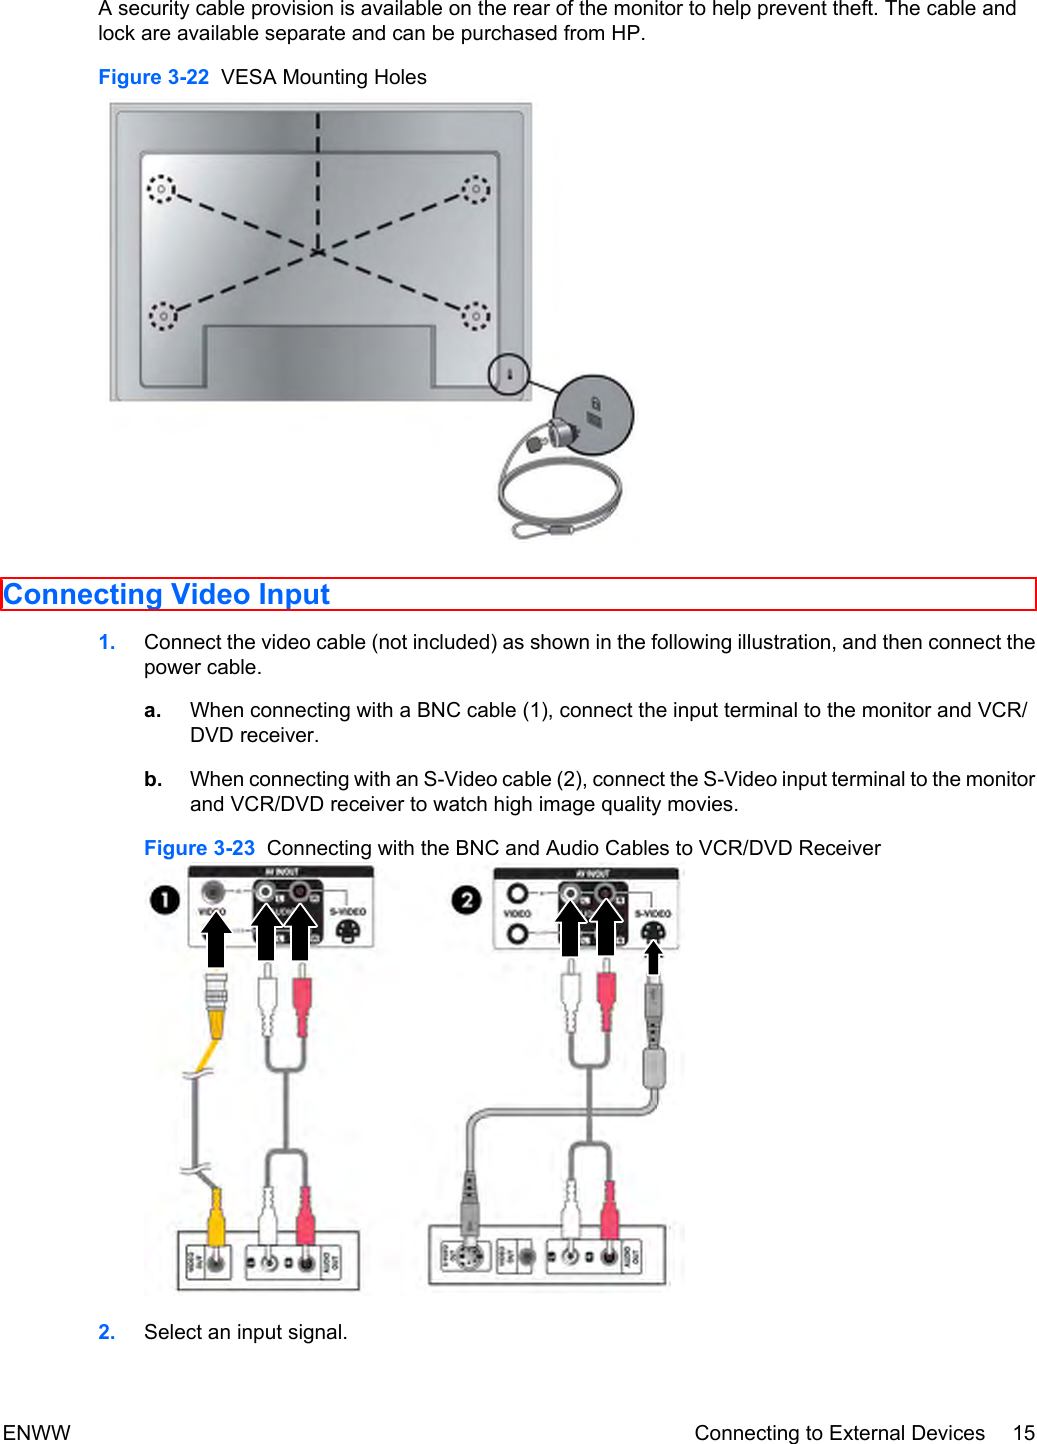 A security cable provision is available on the rear of the monitor to help prevent theft. The cable andlock are available separate and can be purchased from HP.Figure 3-22  VESA Mounting HolesConnecting Video Input1. Connect the video cable (not included) as shown in the following illustration, and then connect thepower cable.a. When connecting with a BNC cable (1), connect the input terminal to the monitor and VCR/DVD receiver.b. When connecting with an S-Video cable (2), connect the S-Video input terminal to the monitorand VCR/DVD receiver to watch high image quality movies.Figure 3-23  Connecting with the BNC and Audio Cables to VCR/DVD Receiver2. Select an input signal.ENWW Connecting to External Devices 15